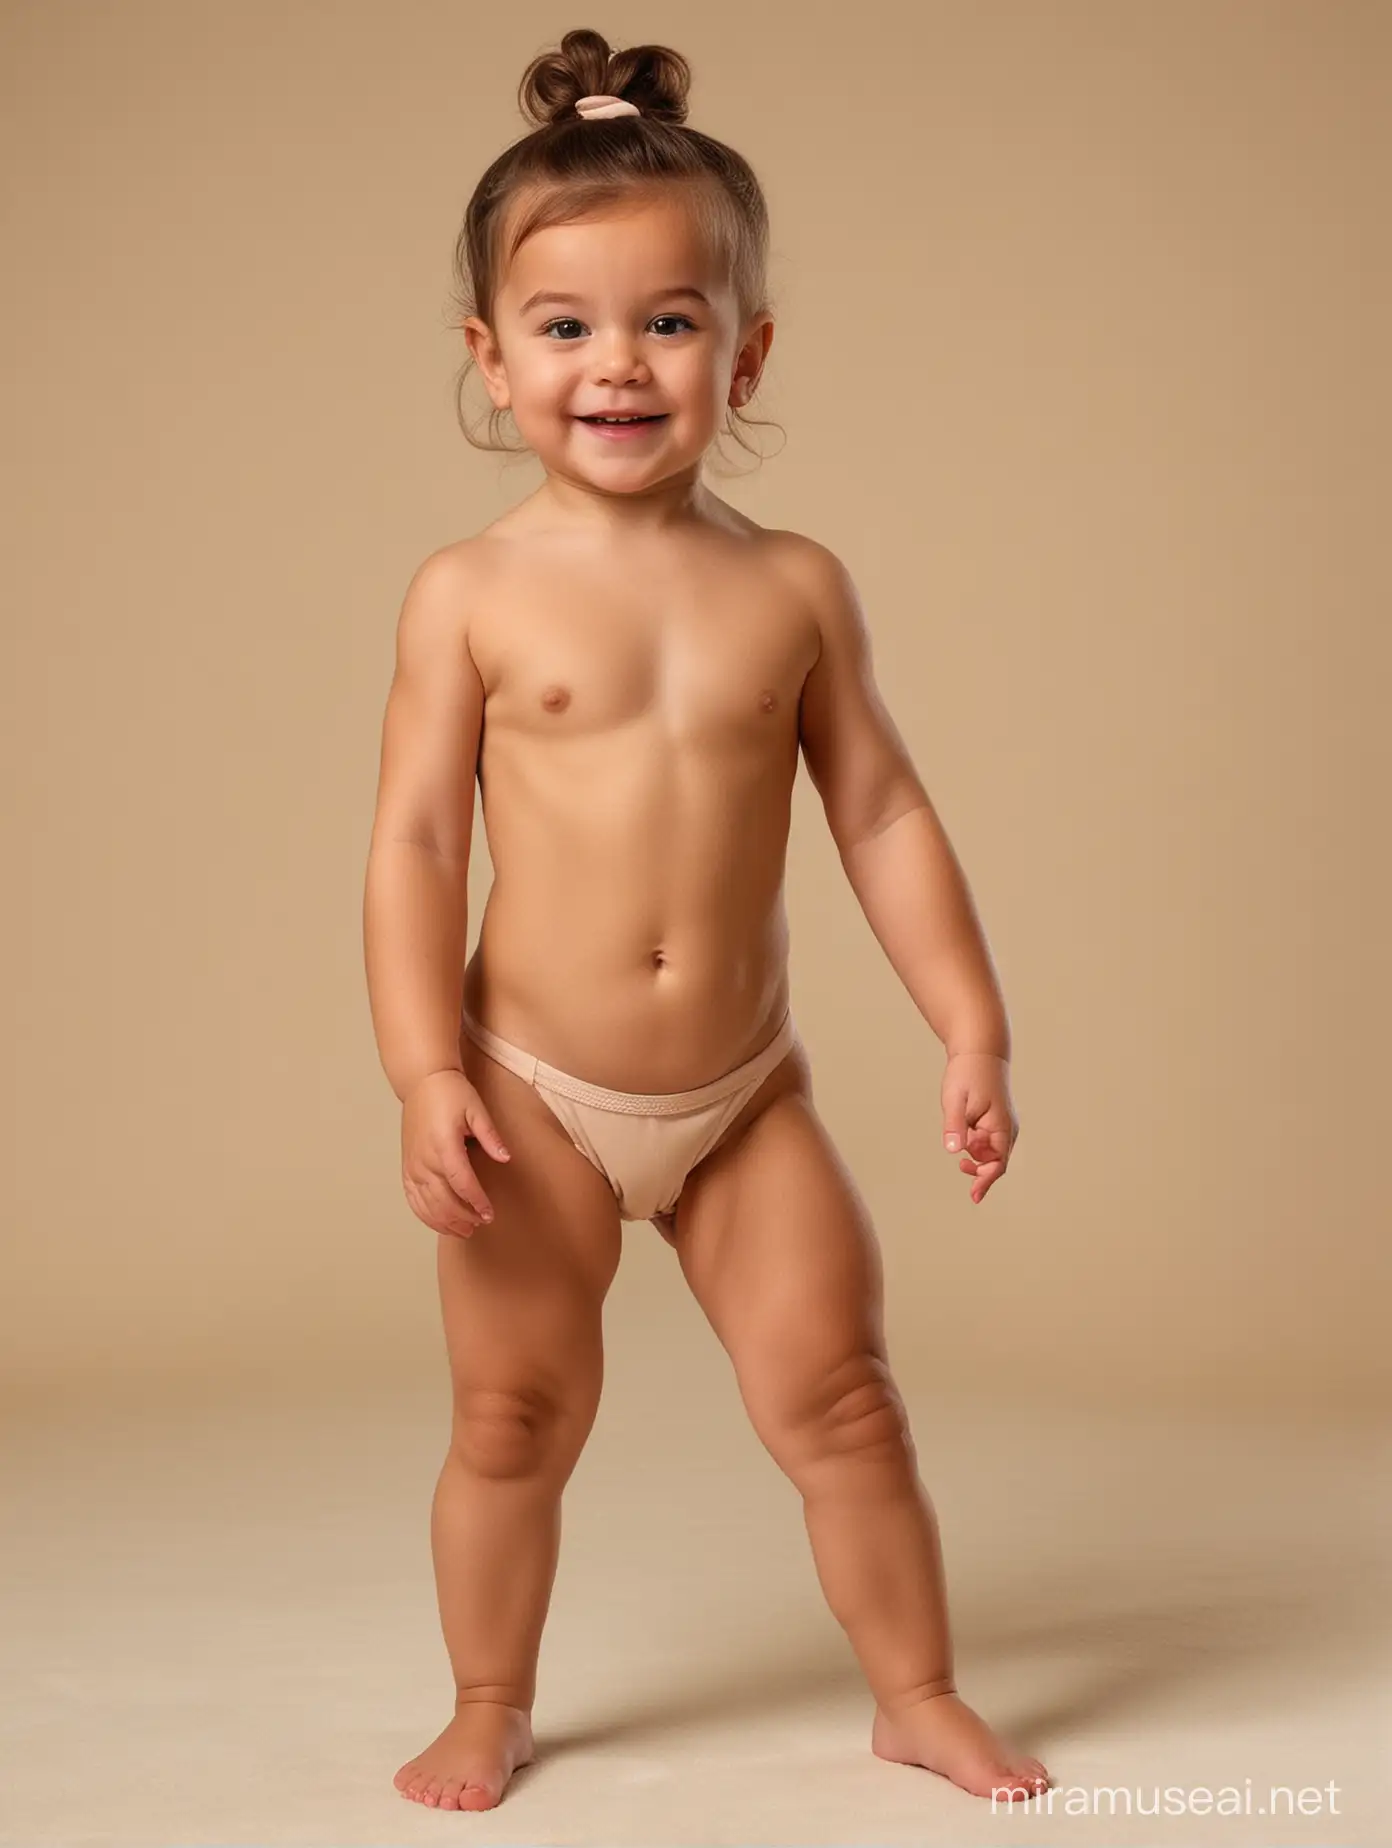 Naked Baby with Muscular Arms and Floral Accents